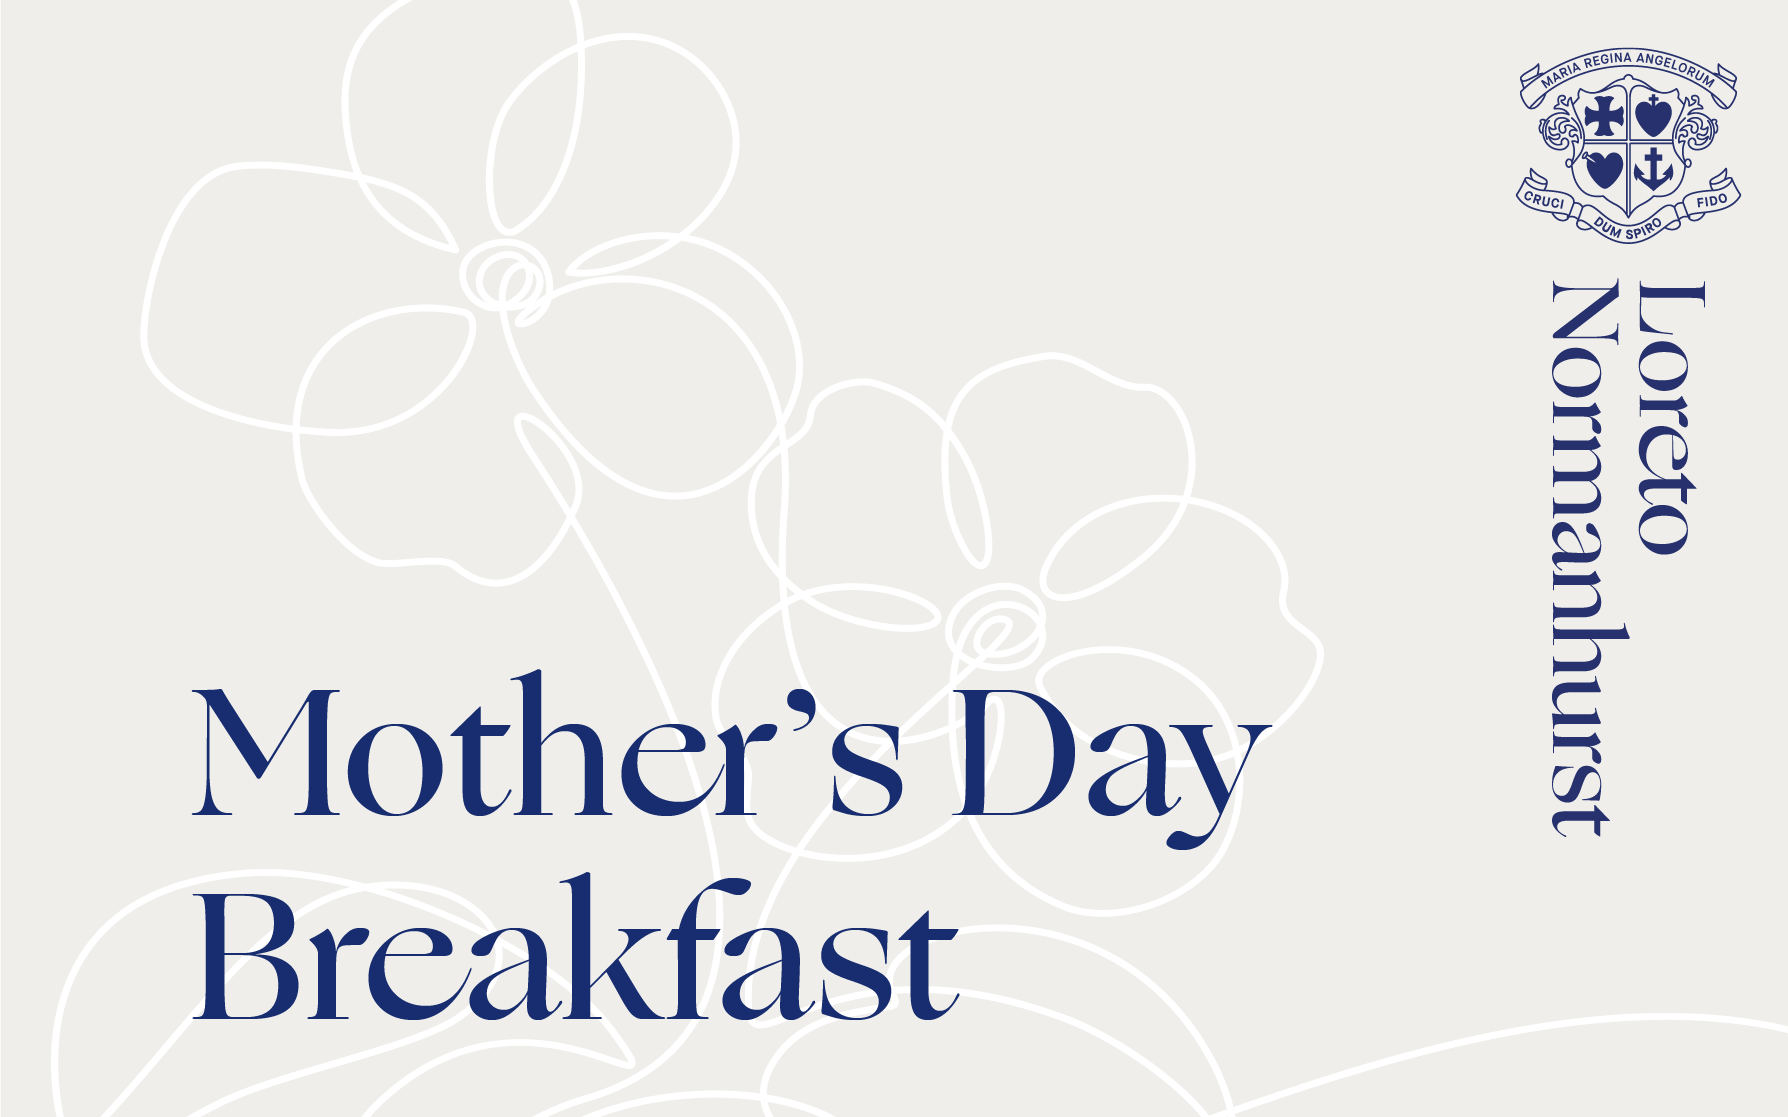 Mother's Day Breakfast - Event Banner_00